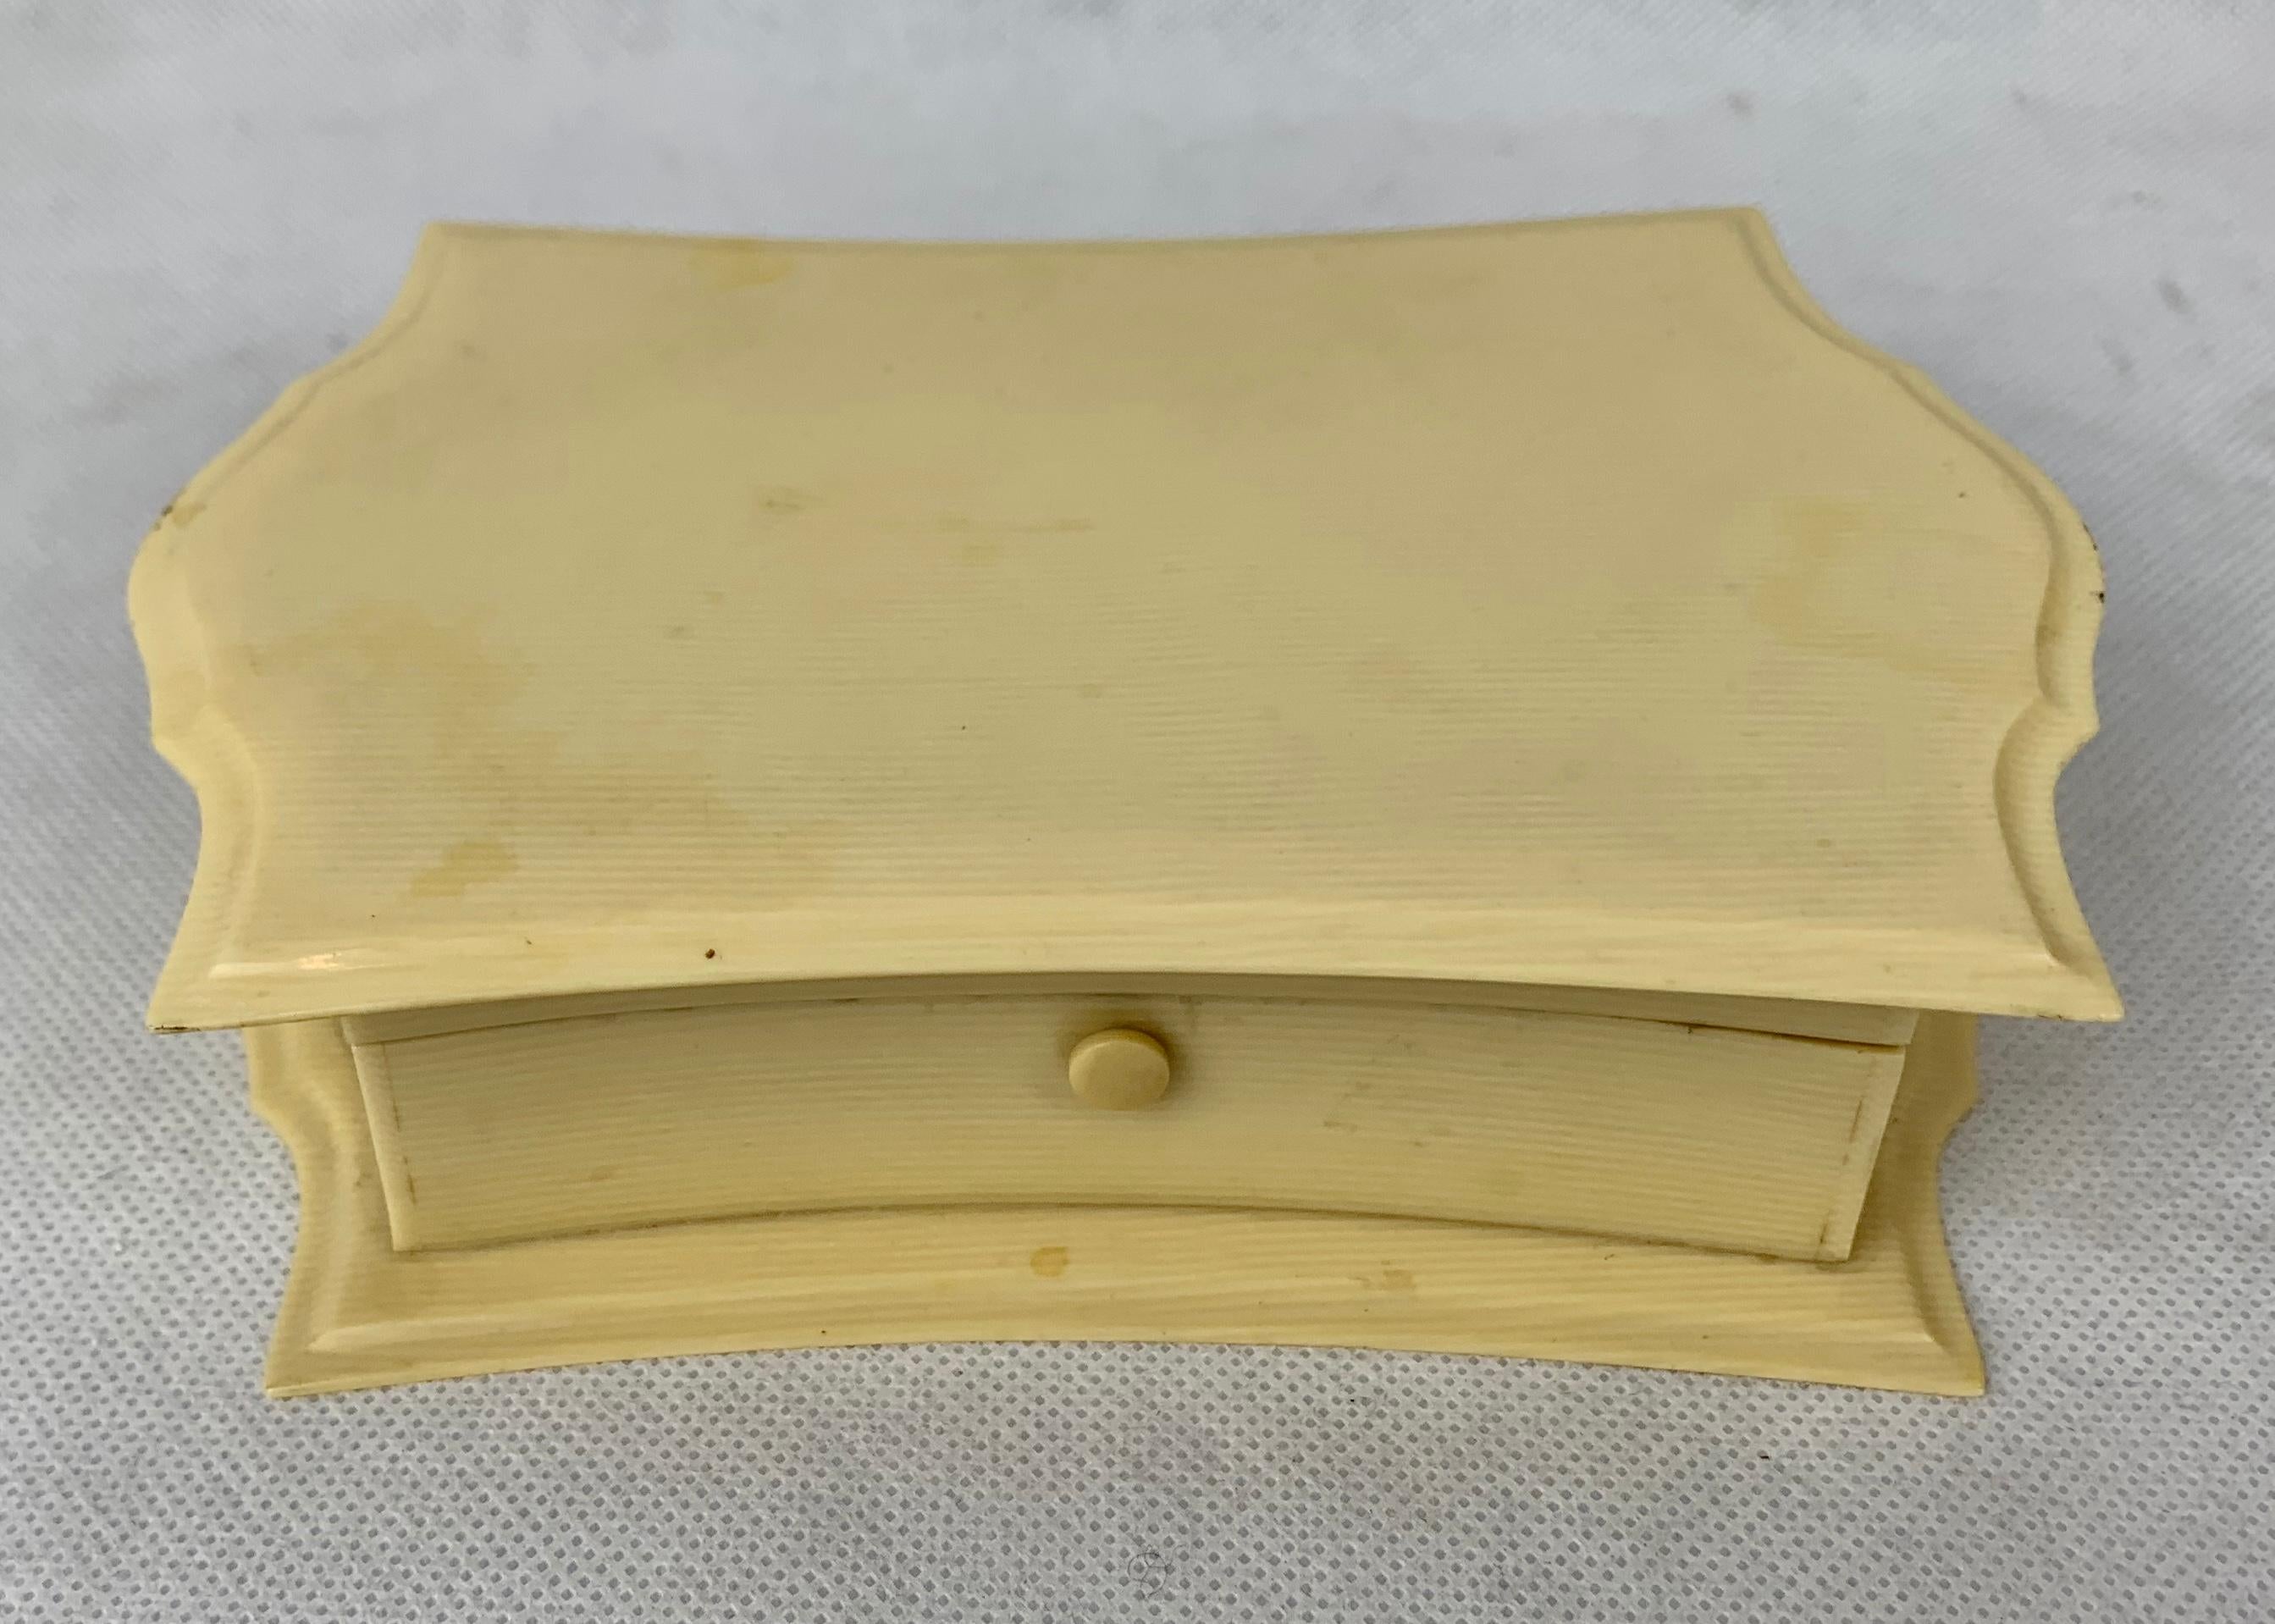 Victorian DuBarry Ivorine Celluloid Jewelry Box with a Turtle Shaped Top For Sale